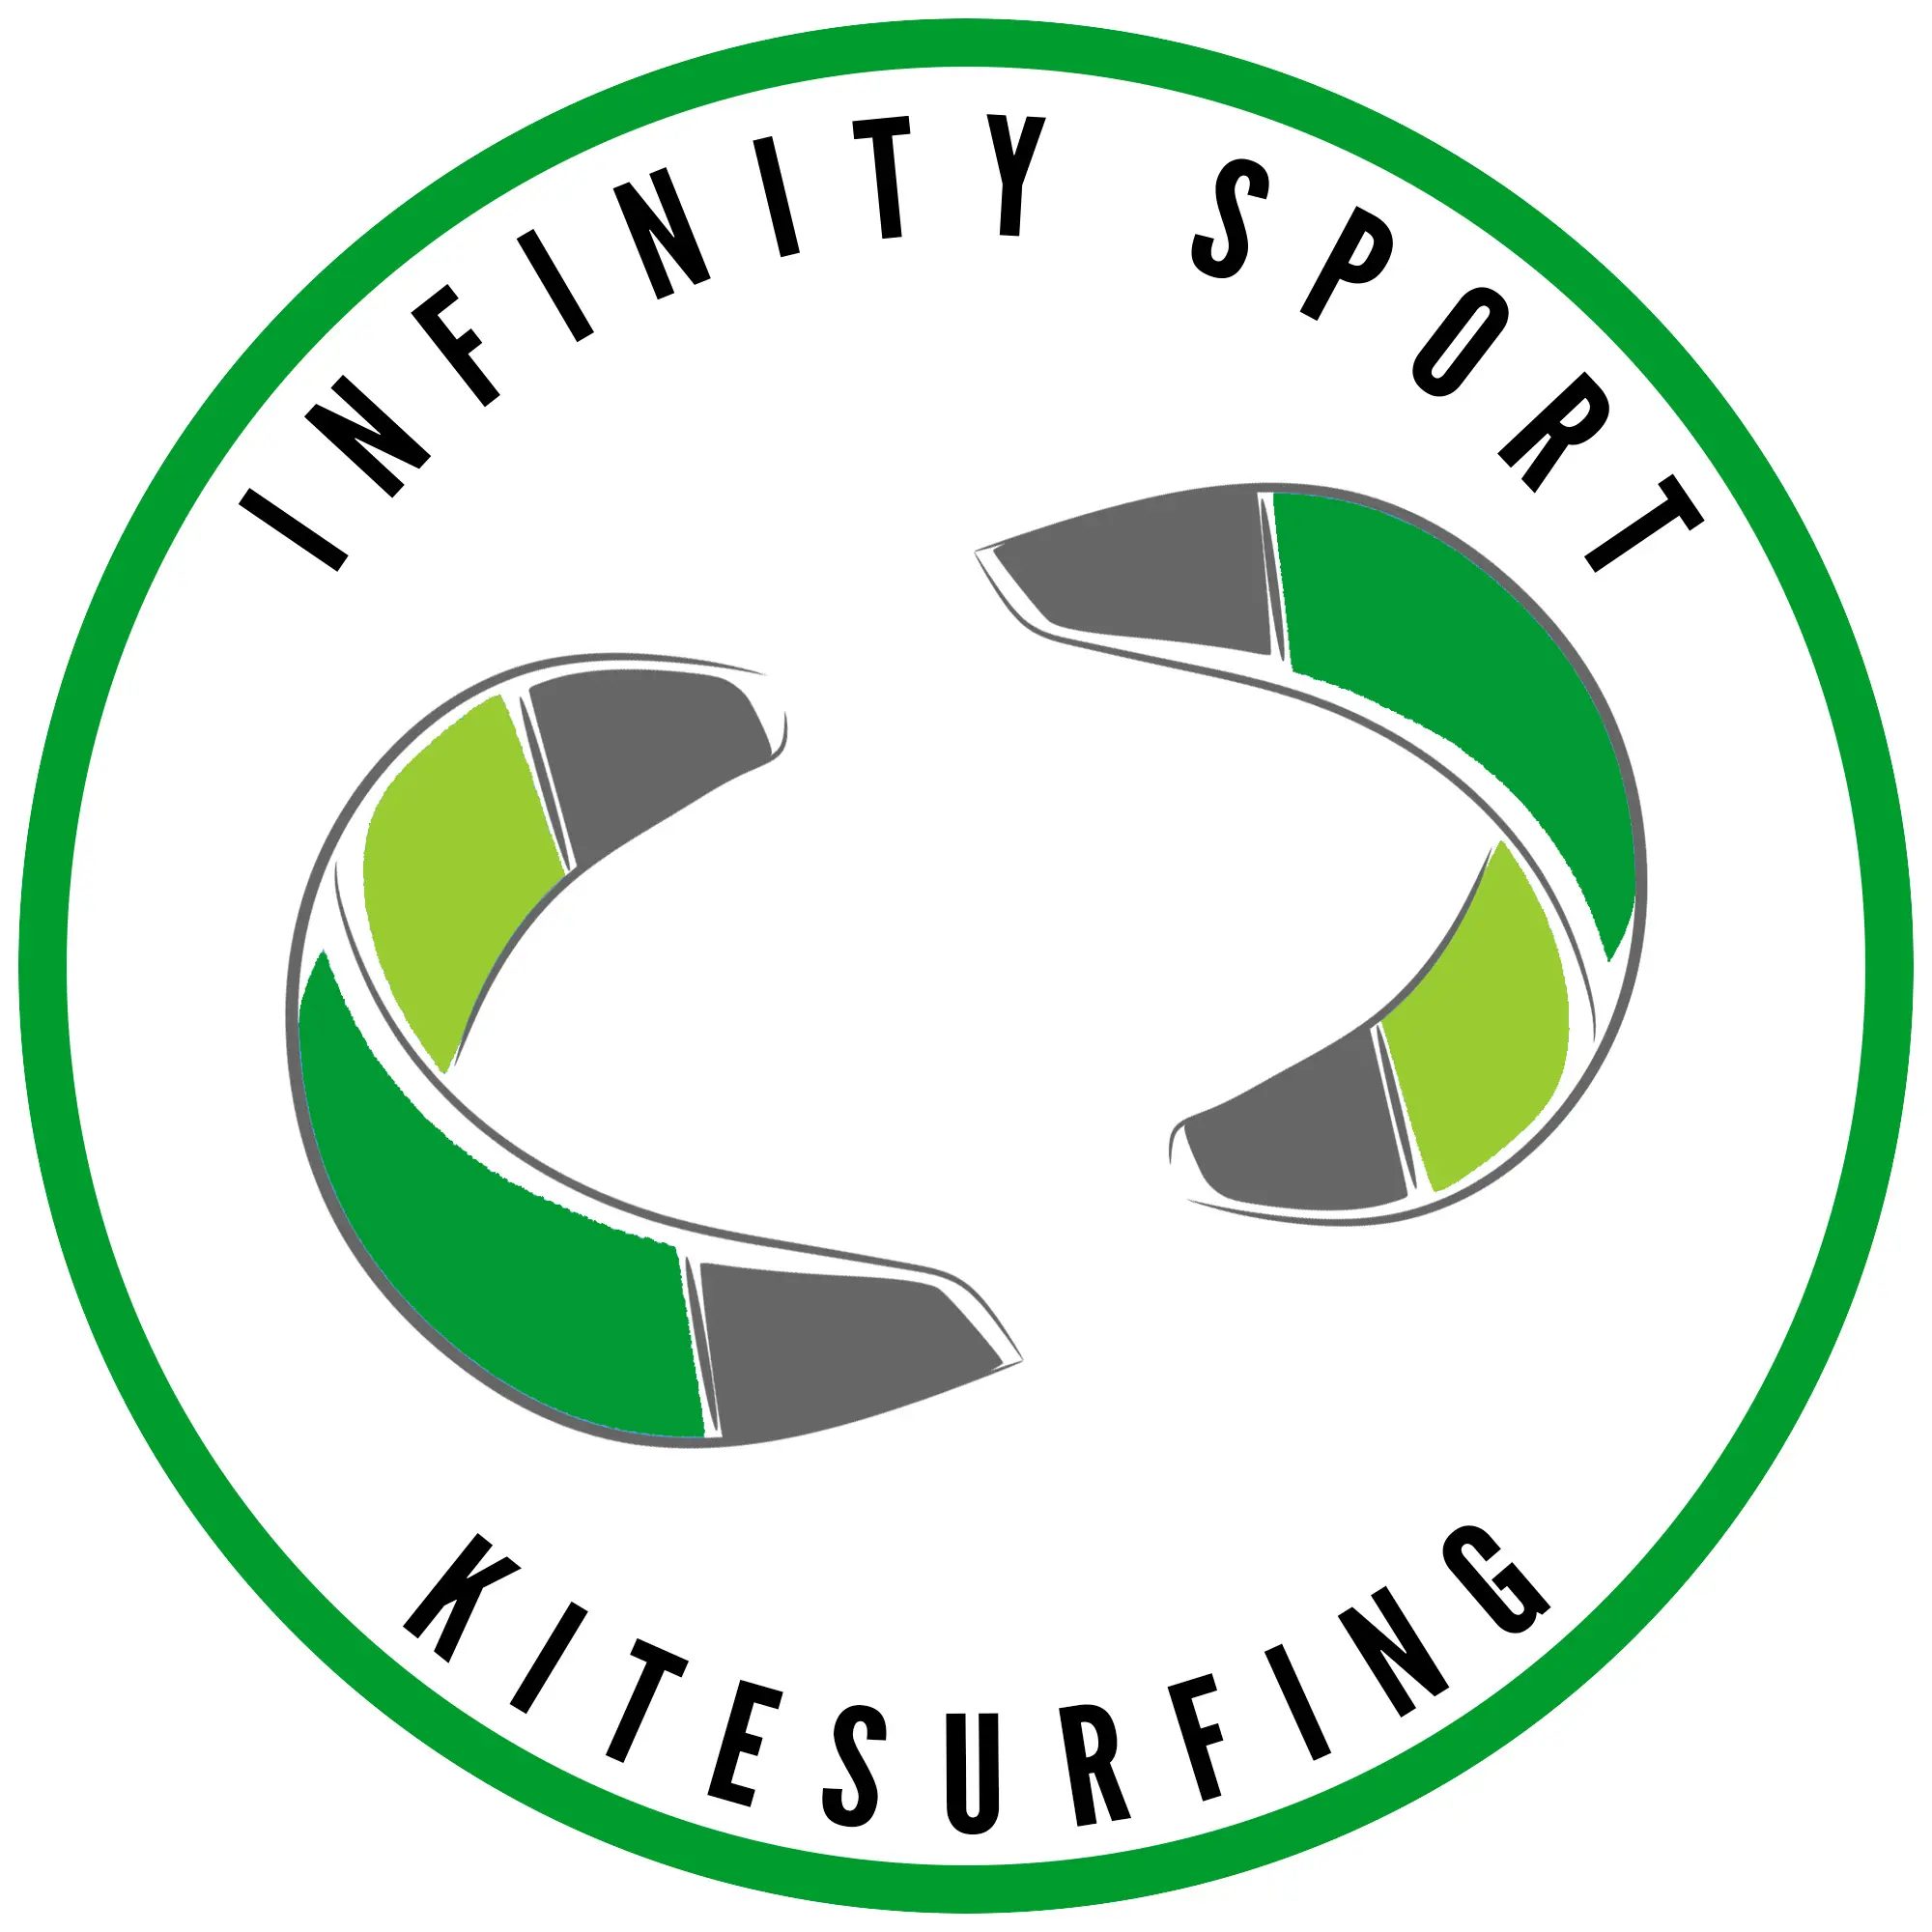 INFINITY SPORTS (@infinity.sports.eg) • Instagram photos and videos